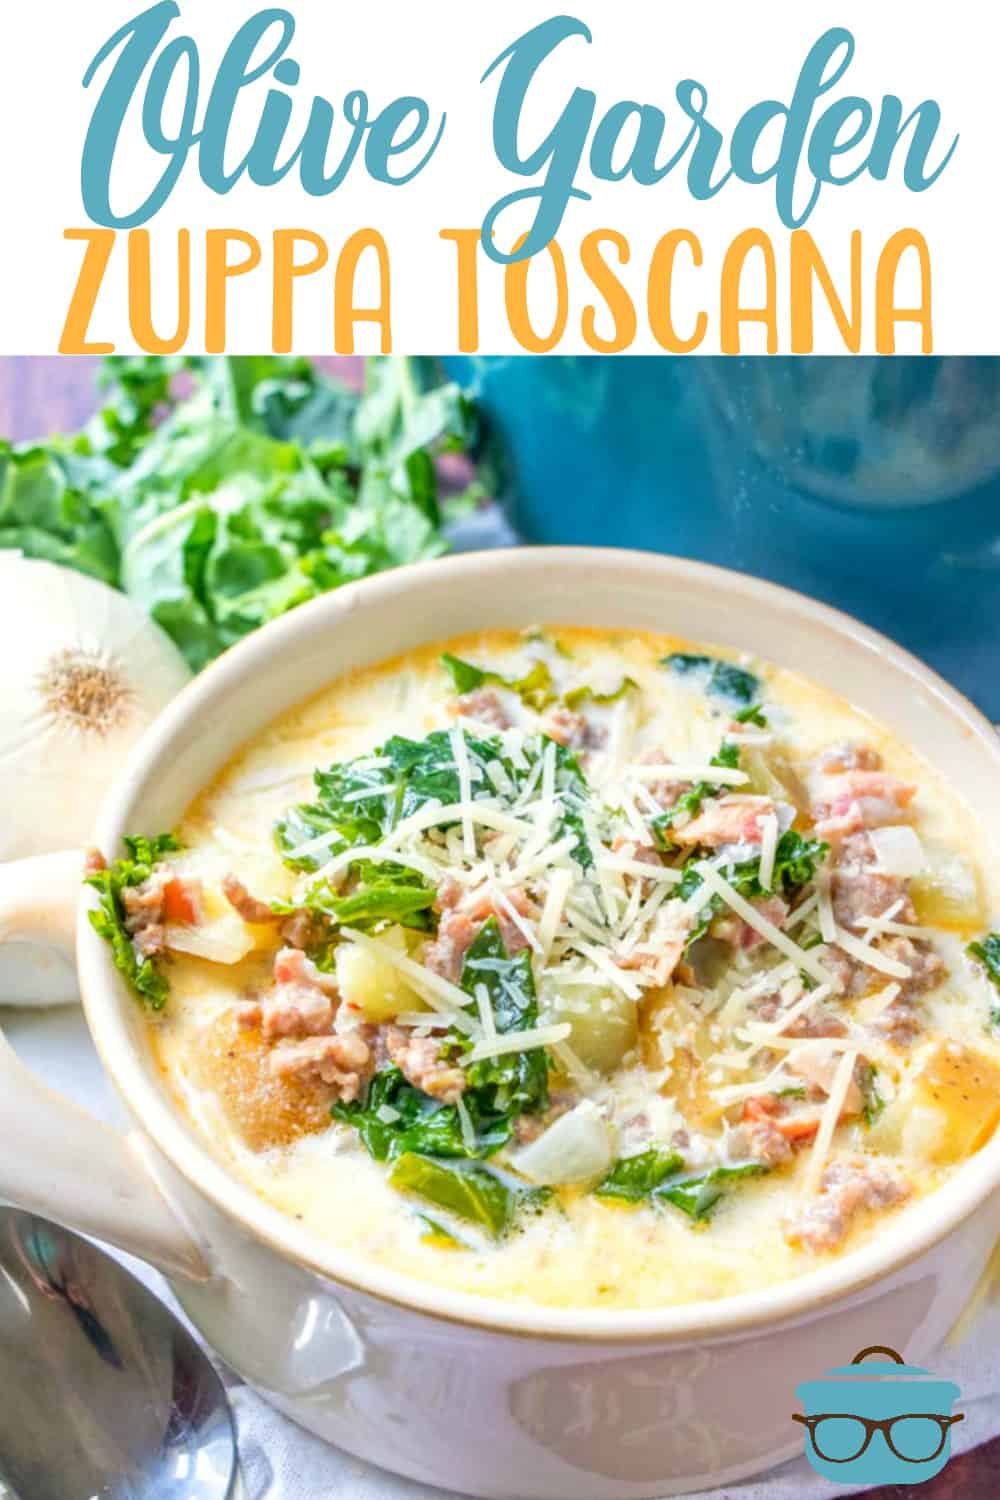 Zuppa toscana soup in a white bowl with text above the photo that says "Olive Garden Zuppa Toscana".